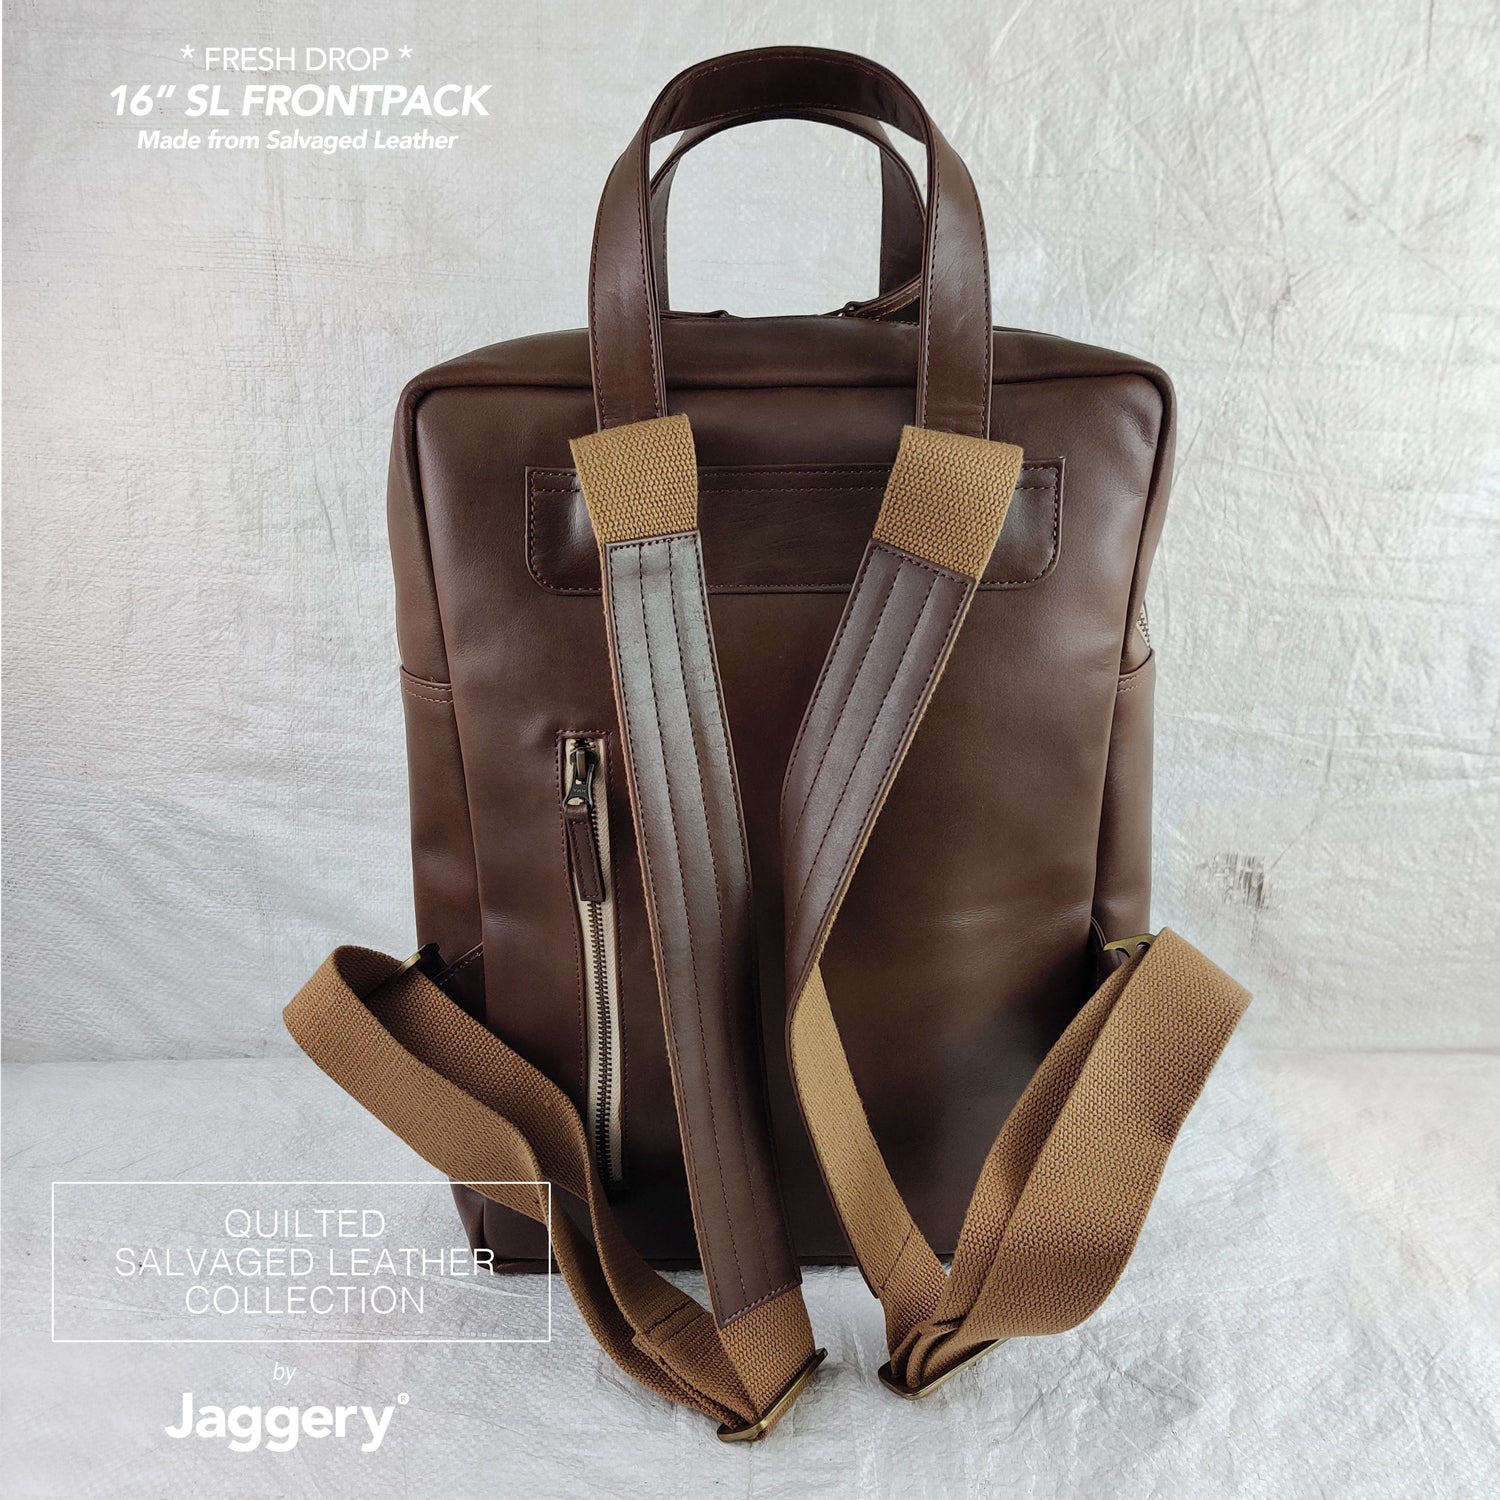 16" Frontpack in Salvaged Leather [laptop bag]